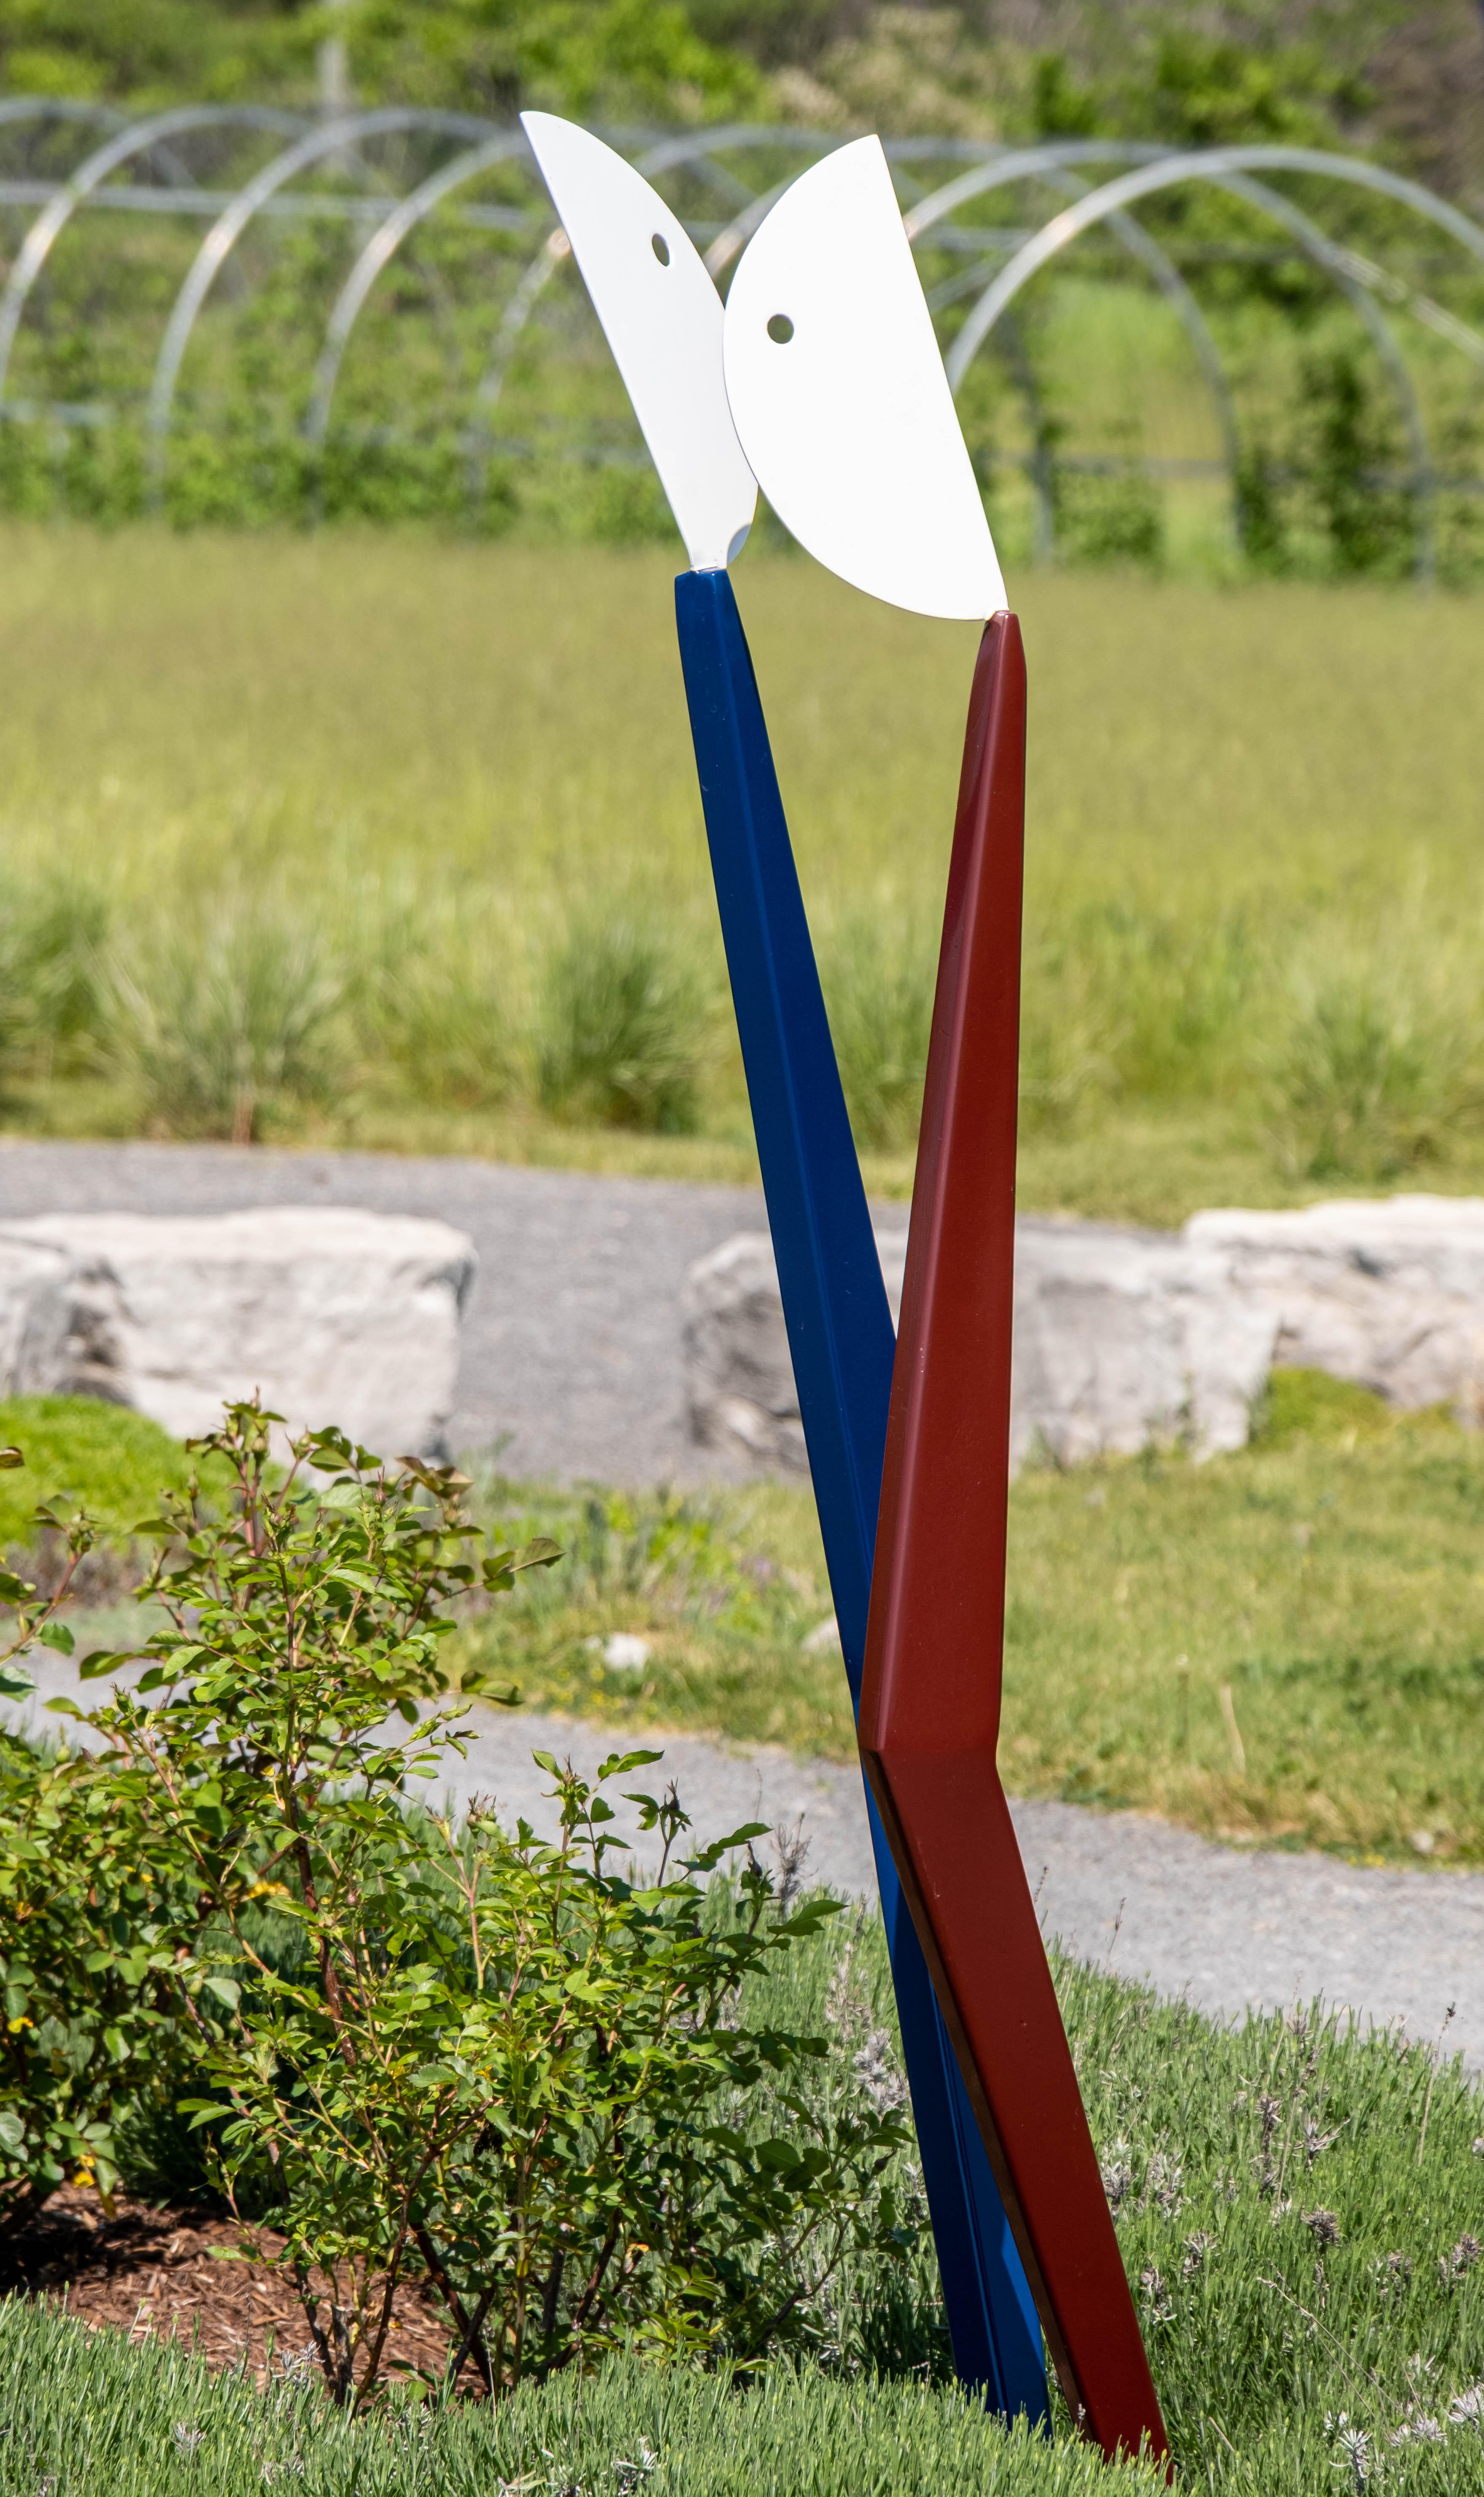 In this engaging abstract sculpture by Robert Clarke-Ellis two figures appear to dance together. White painted half-moon shapes top blue and red stick-like pieces that intersect as if embracing one another. The Toronto artist creates expressive